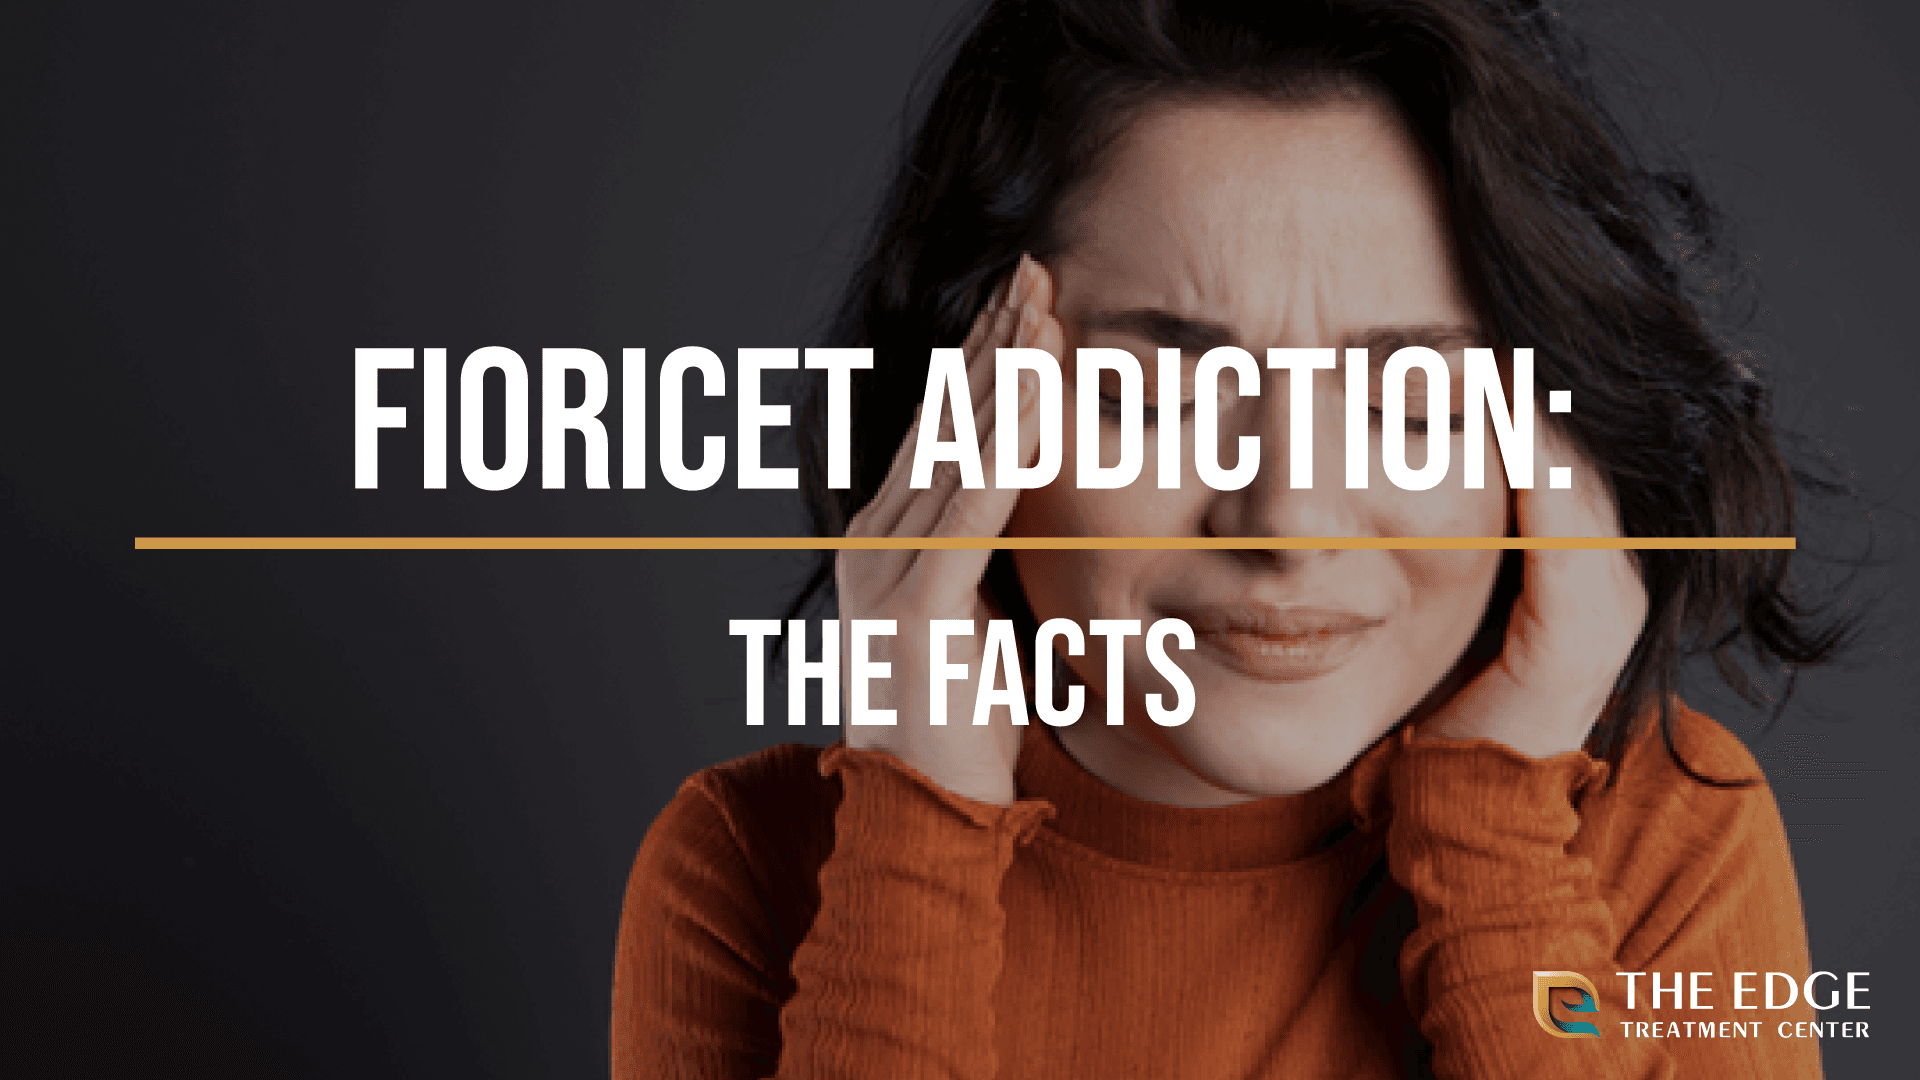 Fioricet: The Facts About Fioricet Addiction